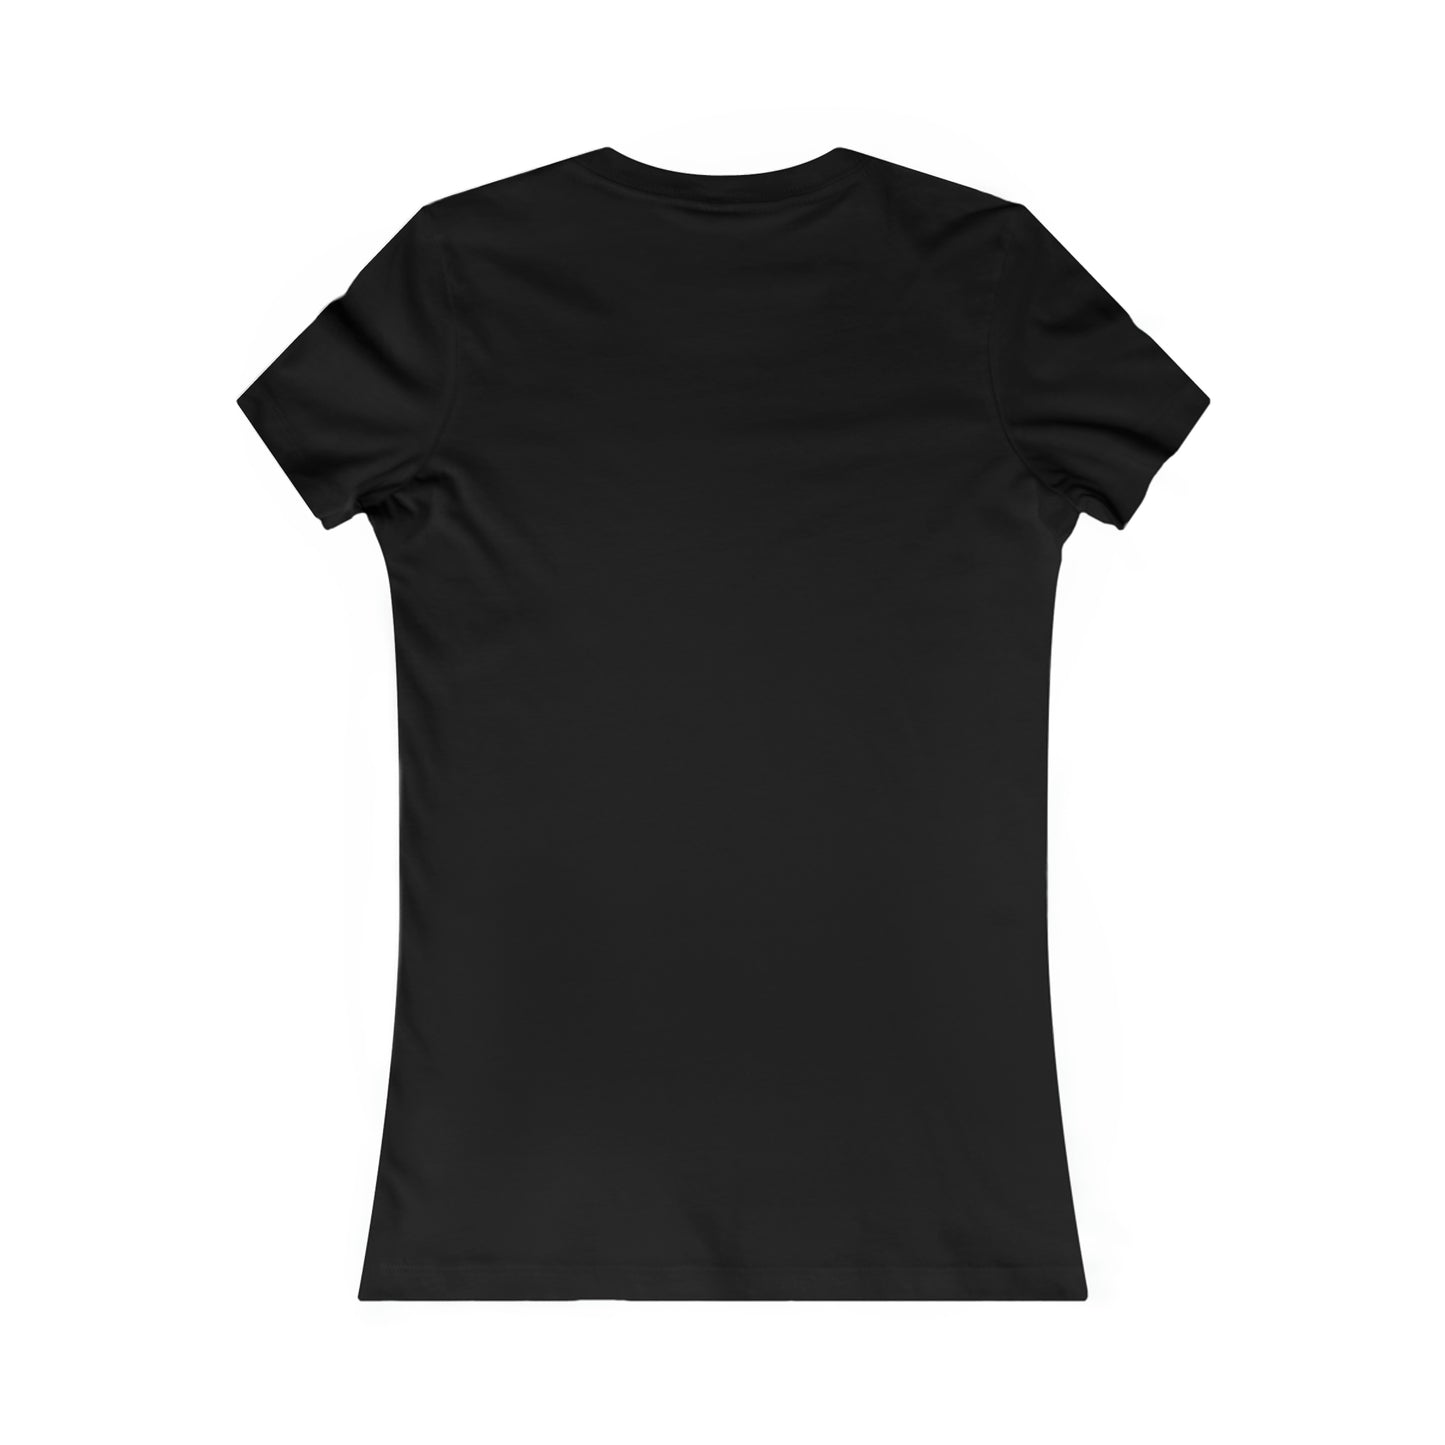 For The Love of Spring - Women's Favorite Tee